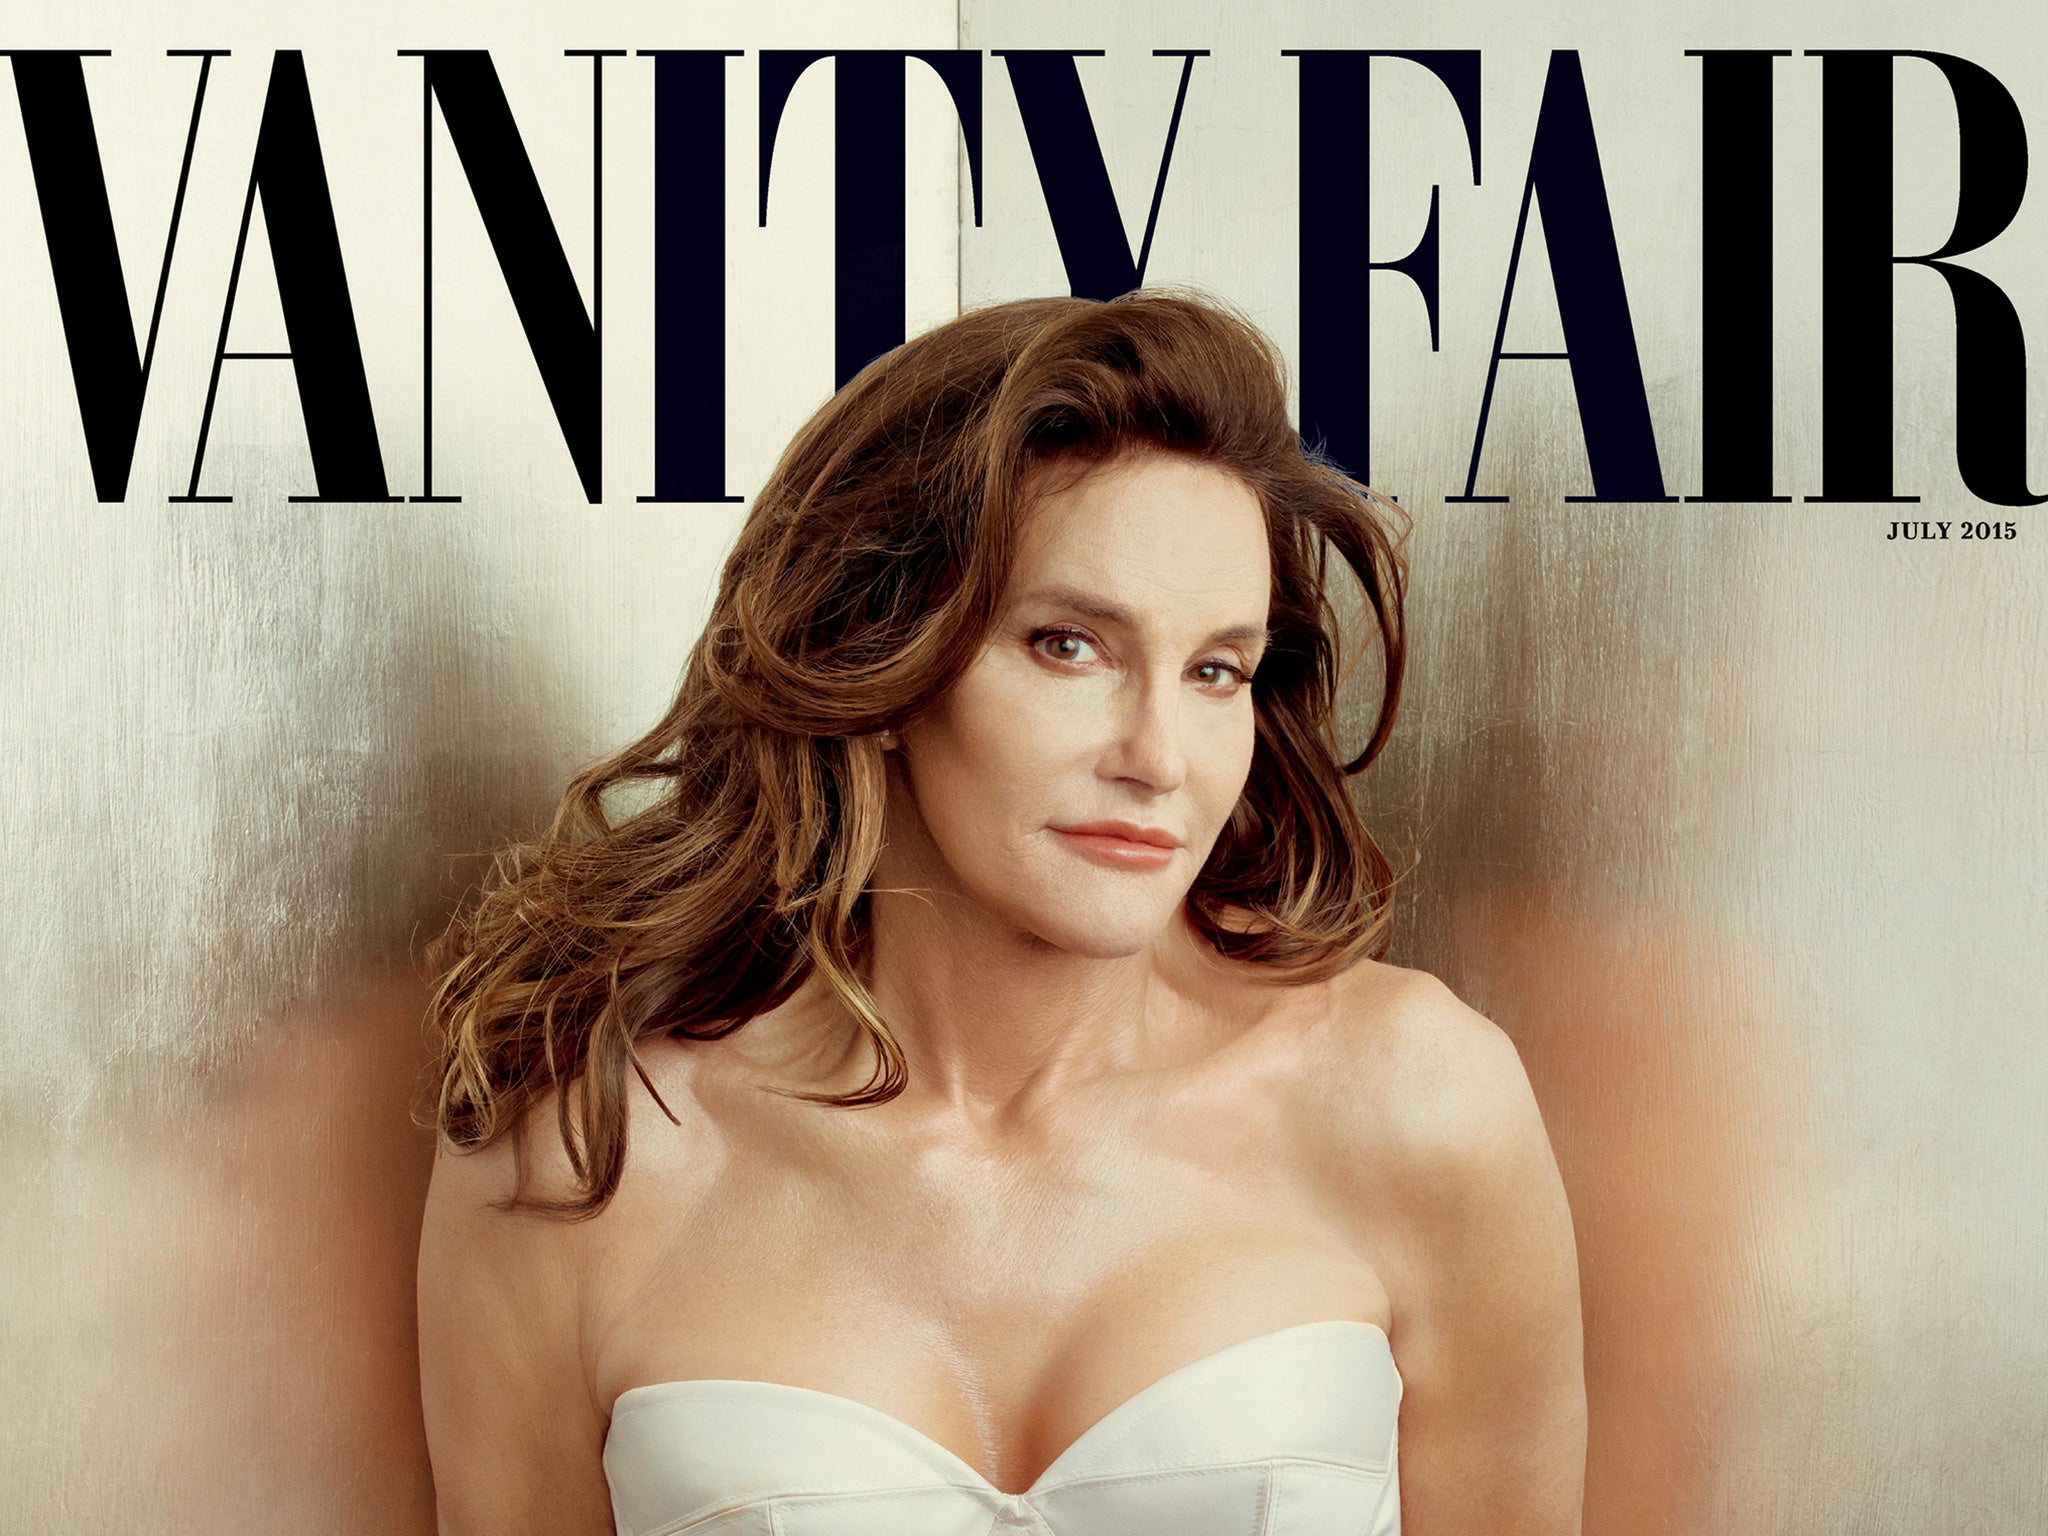 The culture-shaping, Internet-busting Caitlyn Jenner cover of Vanity Fair